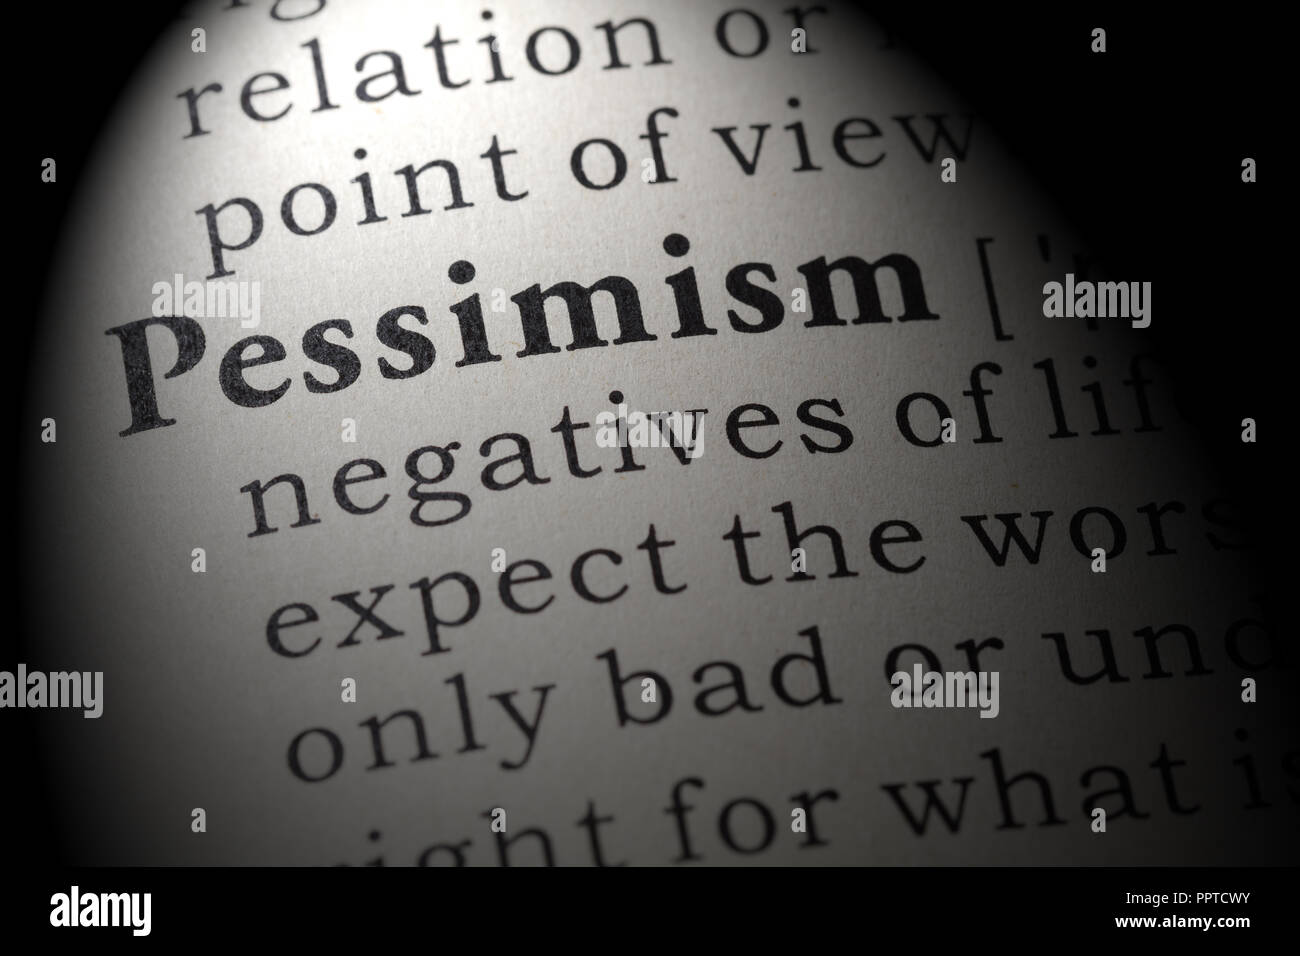 Fake Dictionary, Dictionary definition of the word pessimism. including key descriptive words. Stock Photo